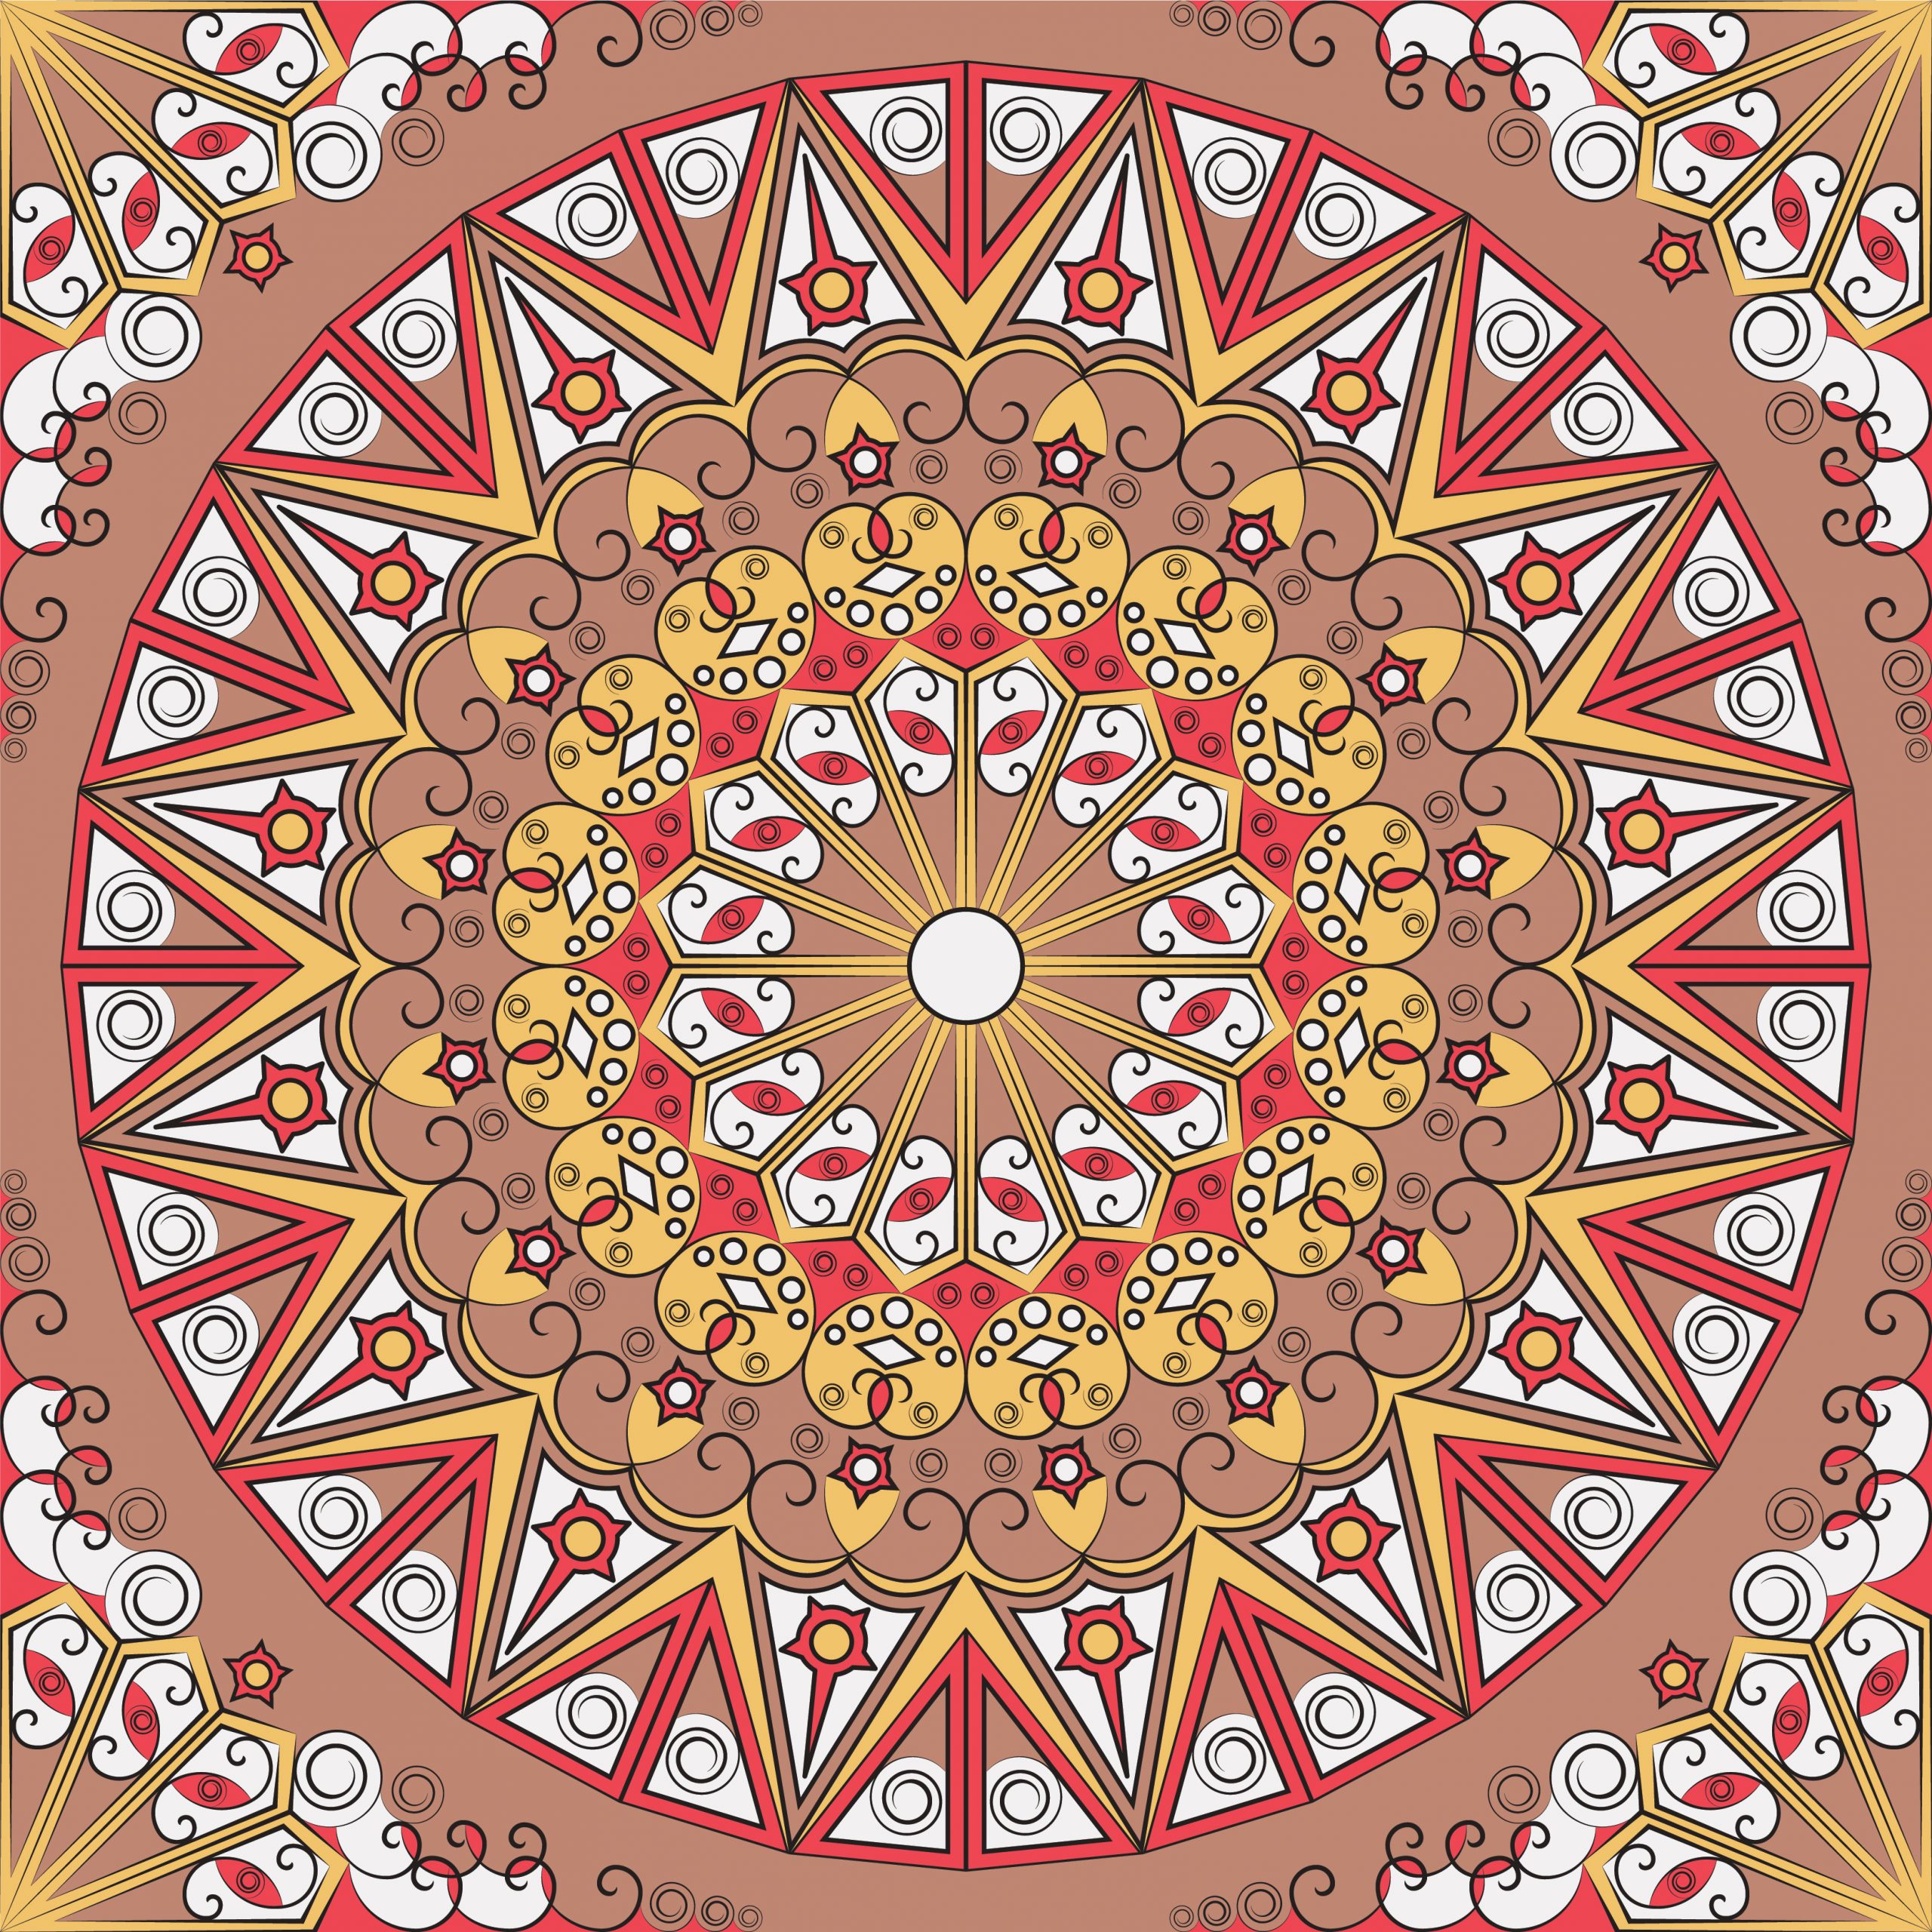 colouring for dementia, Colouring app for dementia patients, Colourful mandala pattern